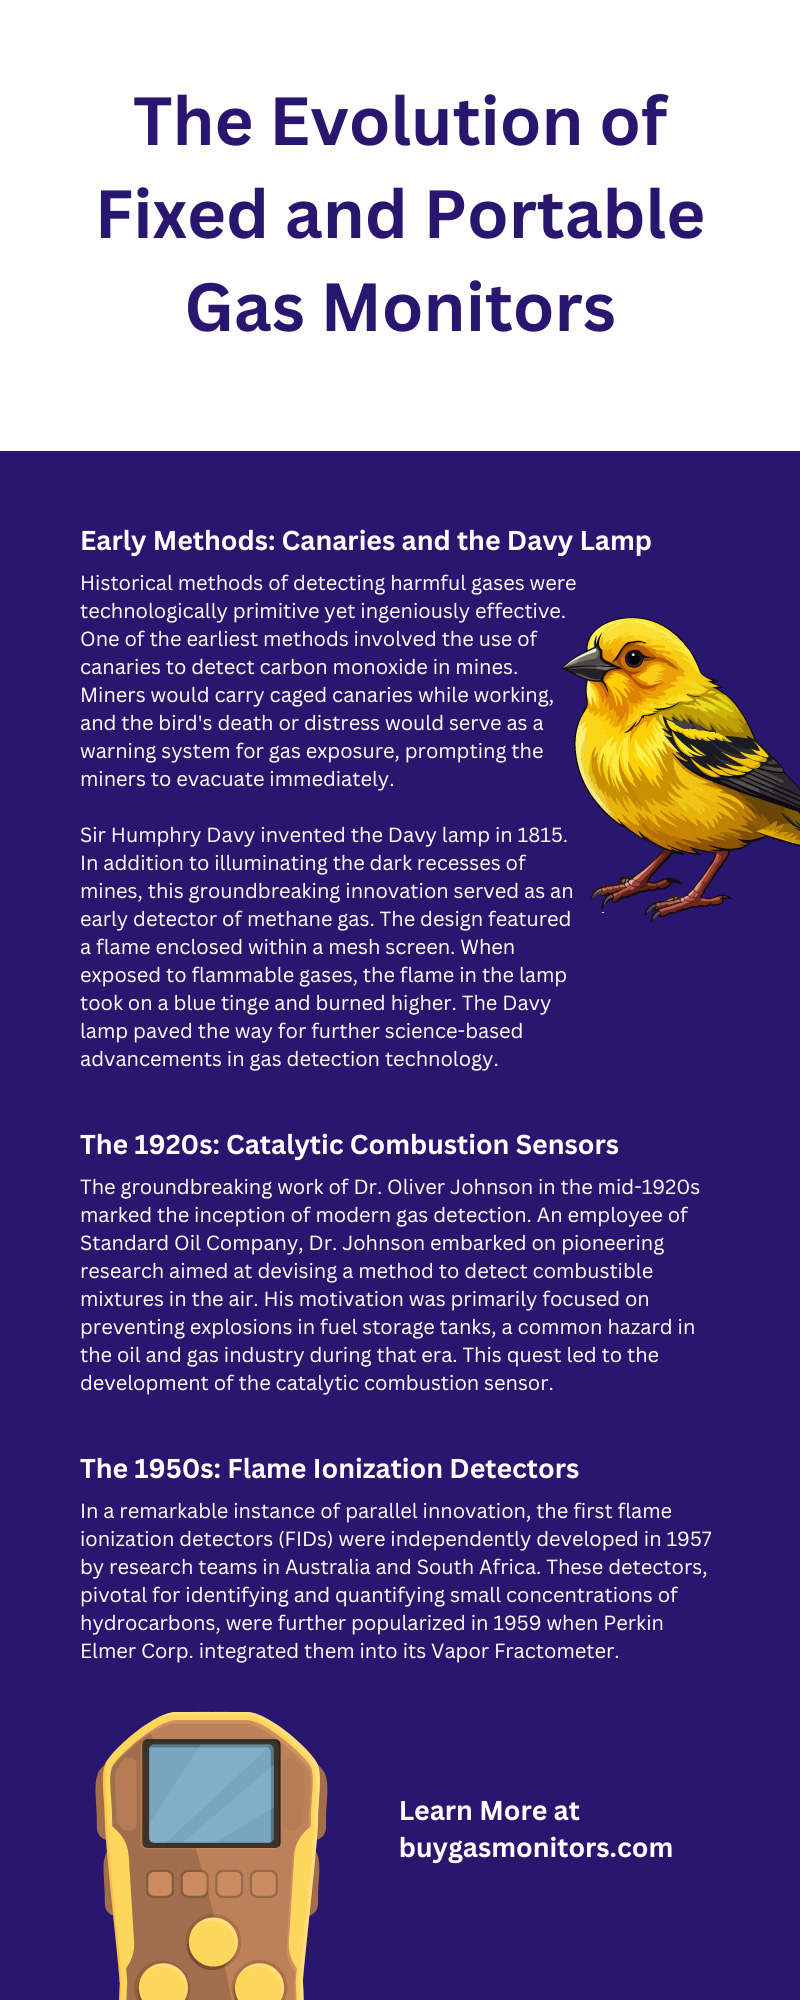 The Evolution of Fixed and Portable Gas Monitors